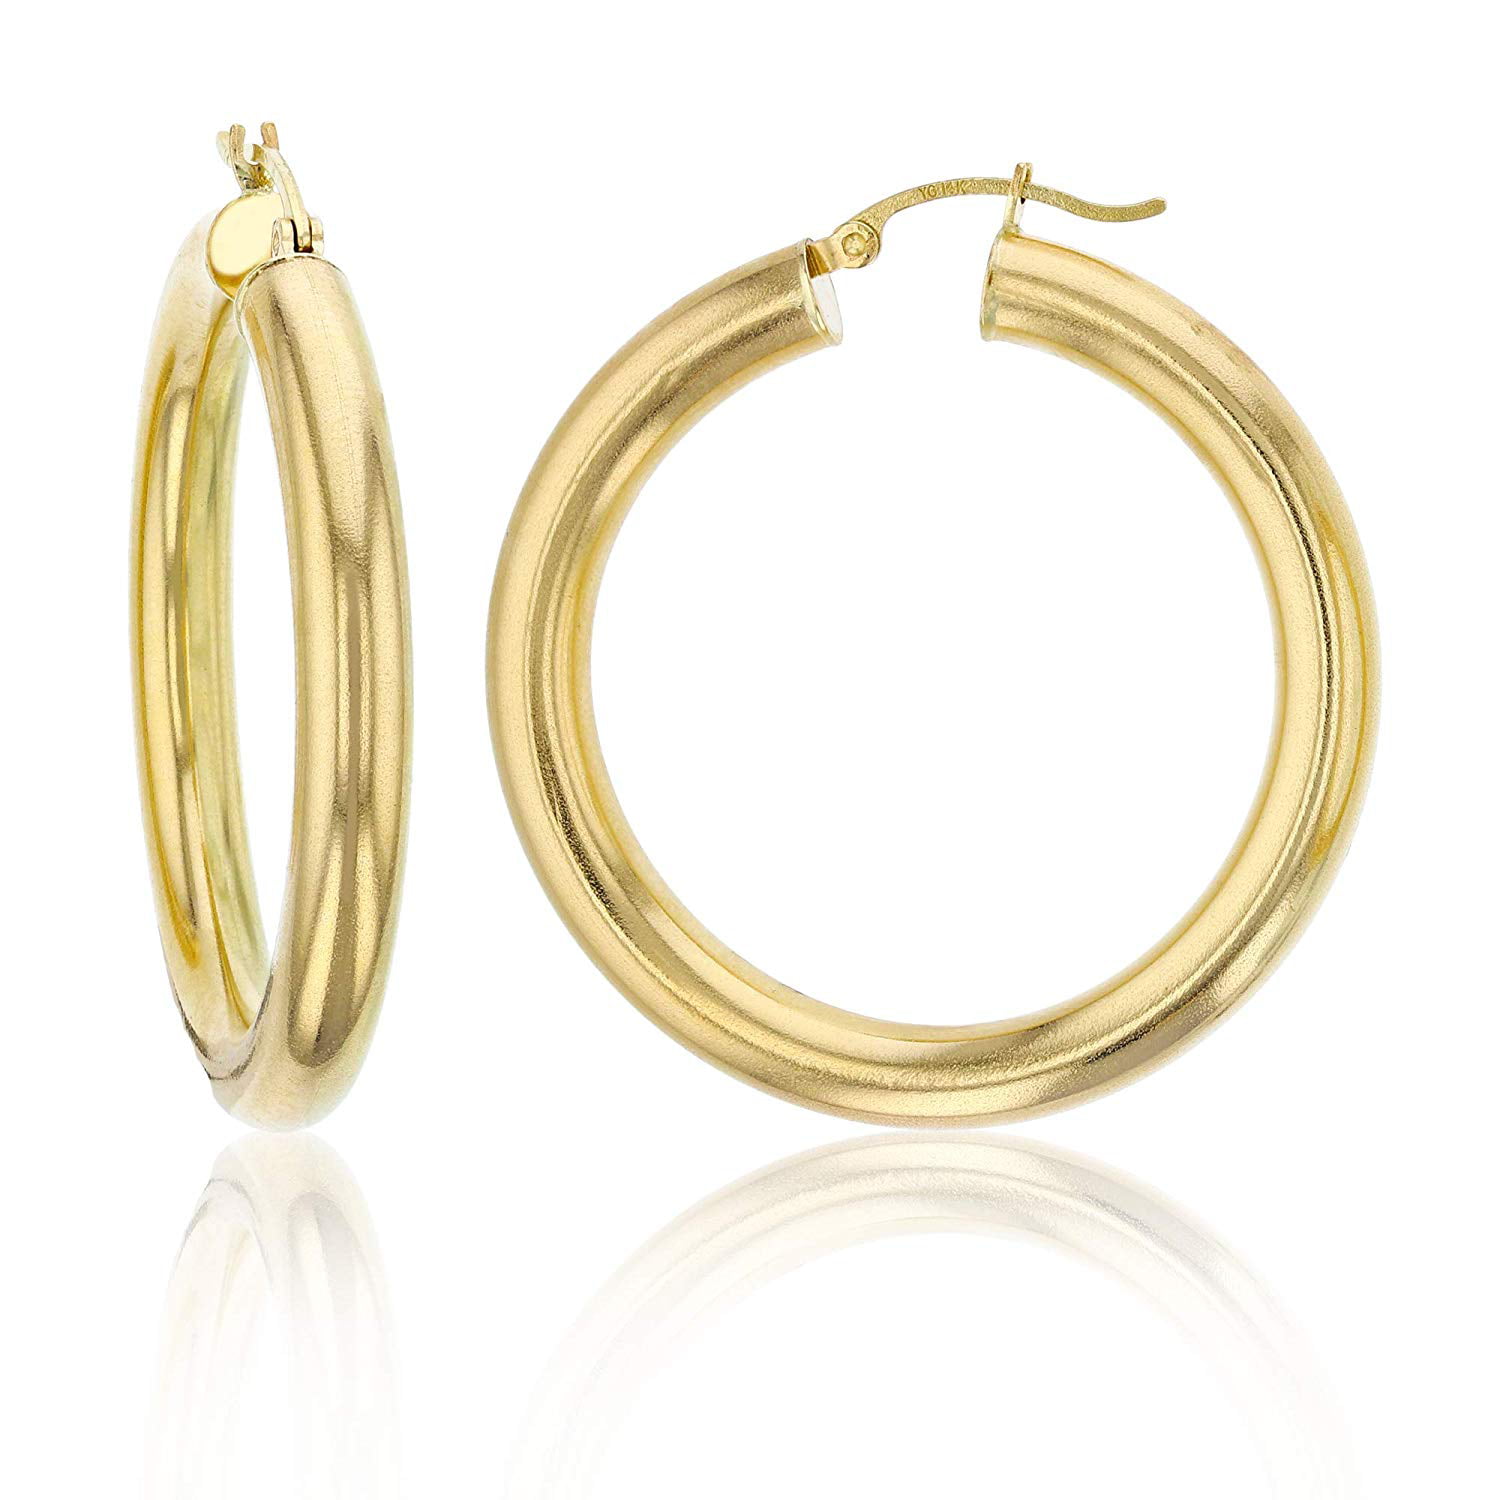 Decadence - 14k Yellow Gold Solid Polished Hoop Earrings for Women